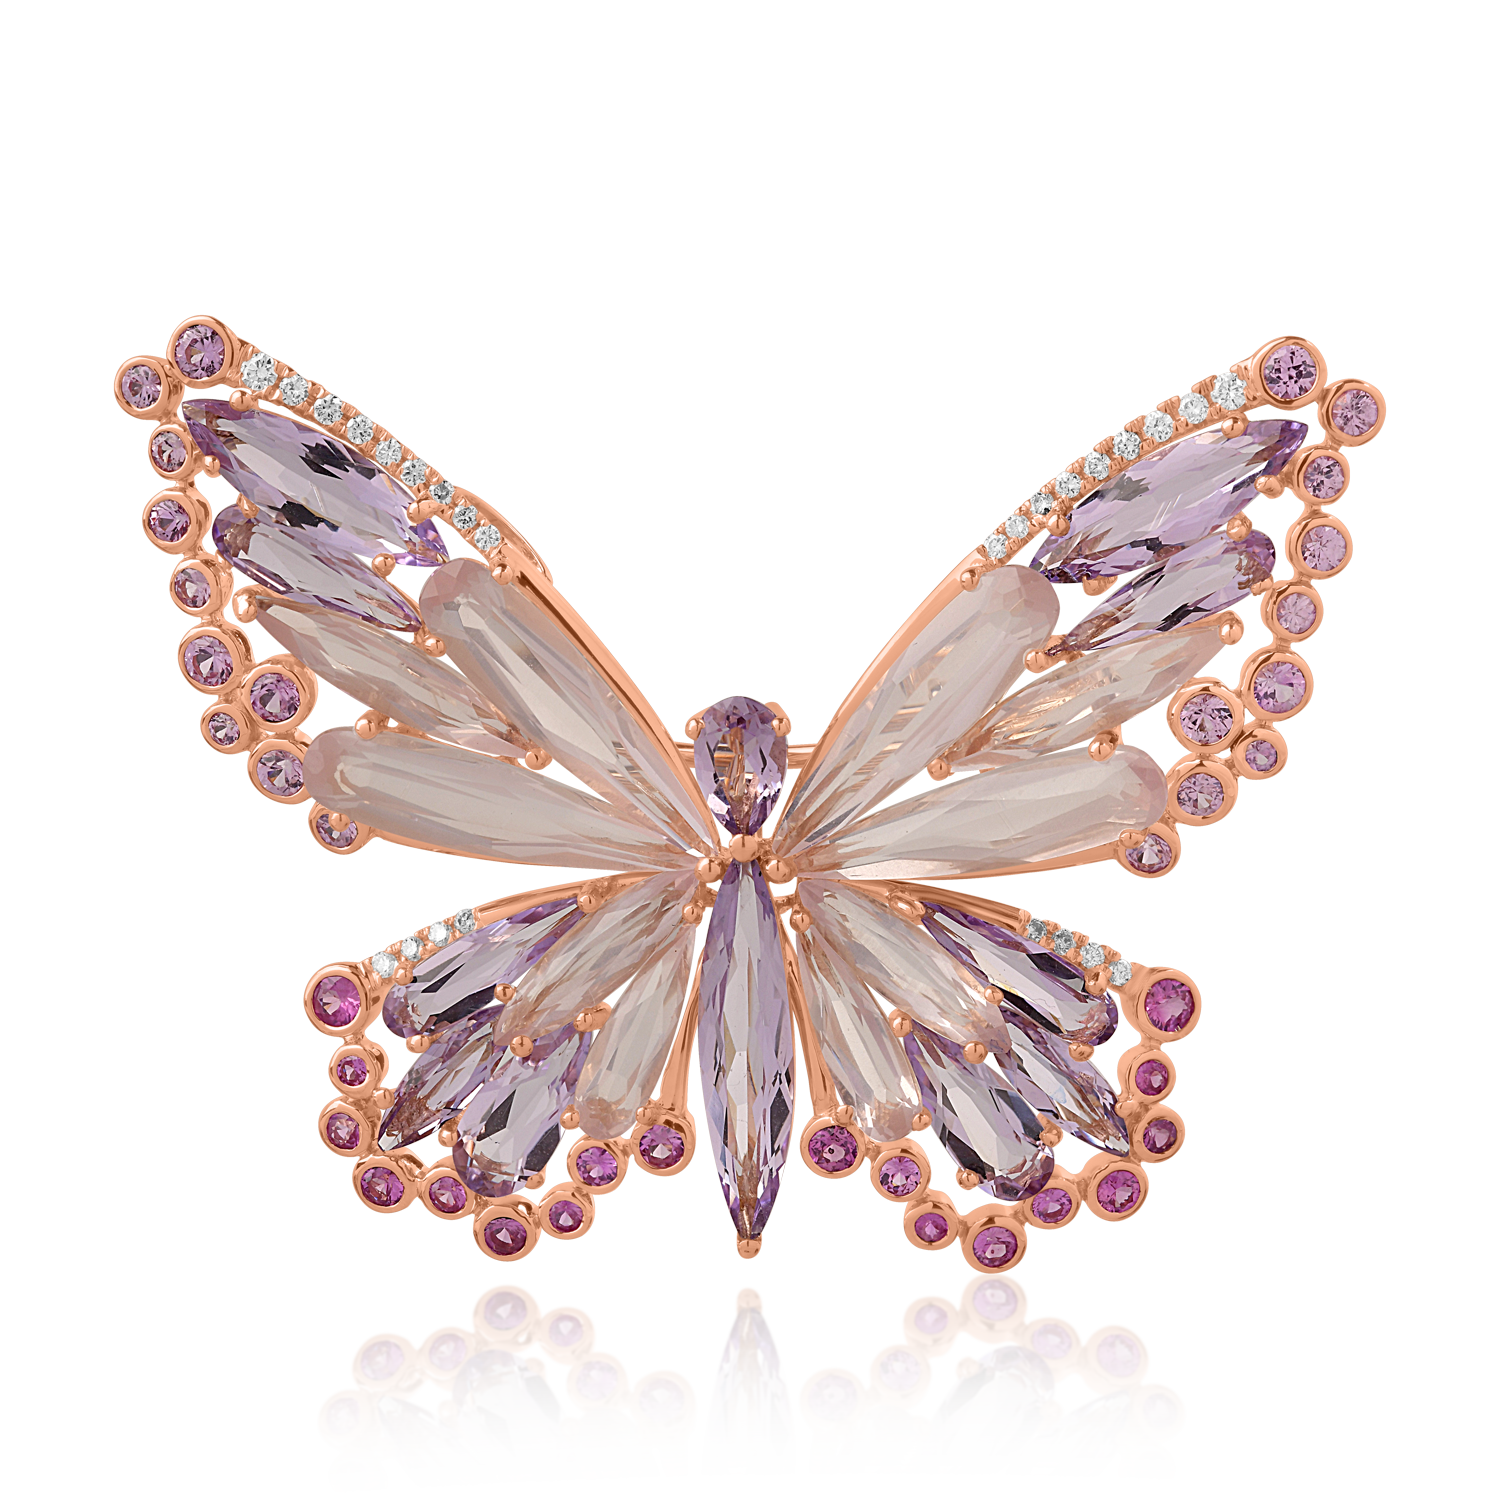 18K rose gold butterfly brooch with 17.98ct precious and semiprecious stones